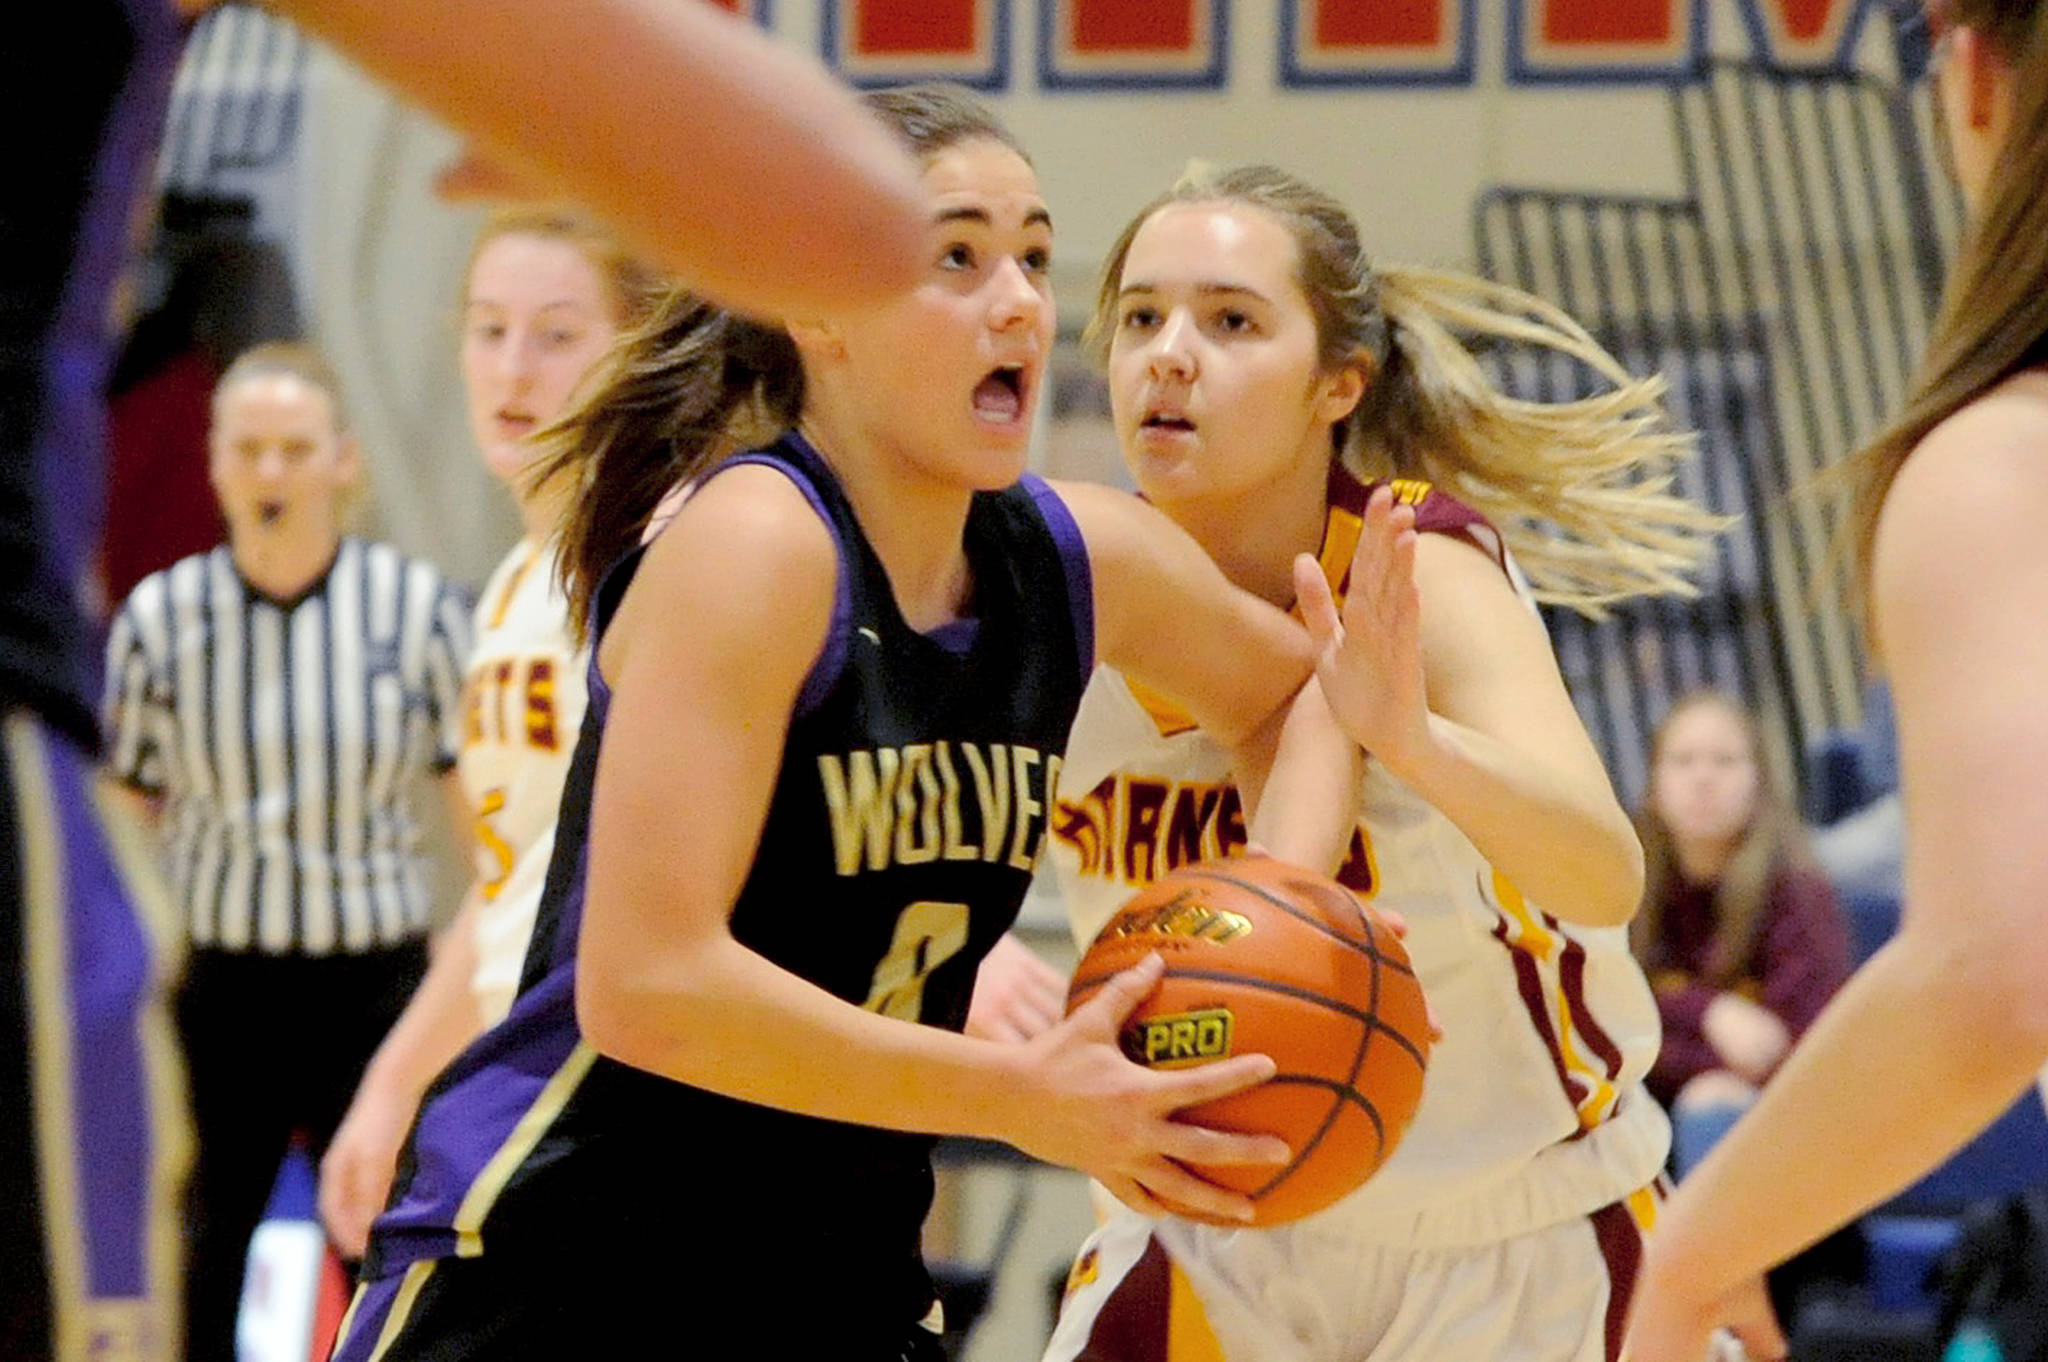 Sequim Wolves forward Hope Glasser drives through traffic to attempt a layup in the third quarter of the Wolves’ 57-53 loss to the White River Hornets on Feb. 20. Glasser scored seven of the Wolves’ first 10 points and 11 overall, but the Wolves came up short in the final few minutes against the Hornets in a district playoff loser-out game on Feb. 20 to qualify for the regional round of the 2A State Championships. Sequim Gazette photo by Conor Dowley